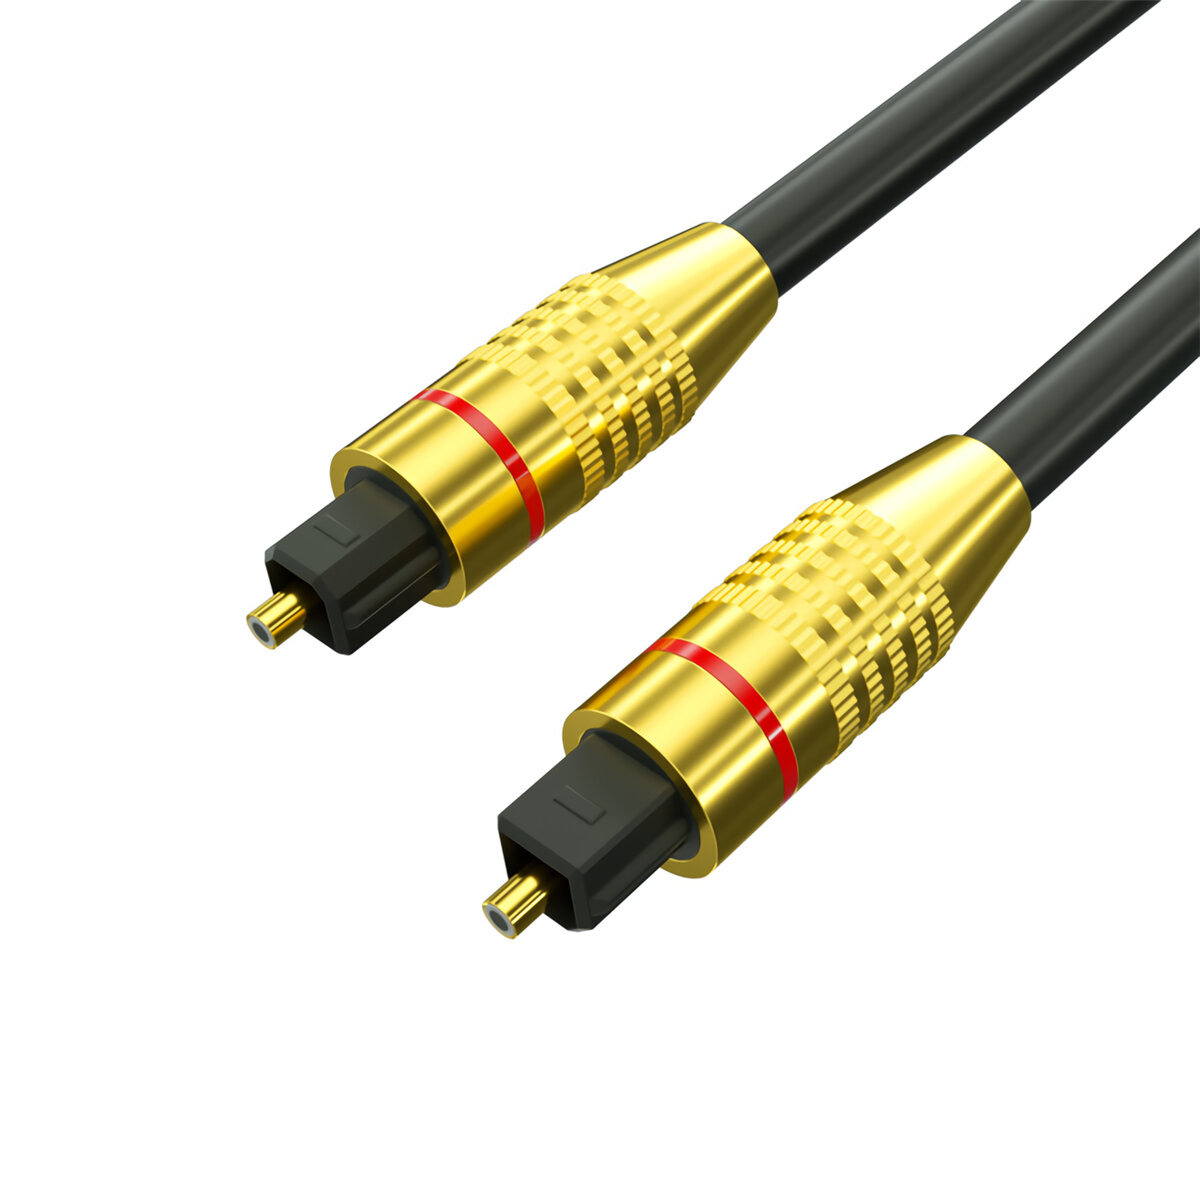 

GCX Digital Optical Audio Cable Toslink Male to Male SPDIF Fiber Optical Audio Cord for Amplifiers Blue-ray Player Xbox